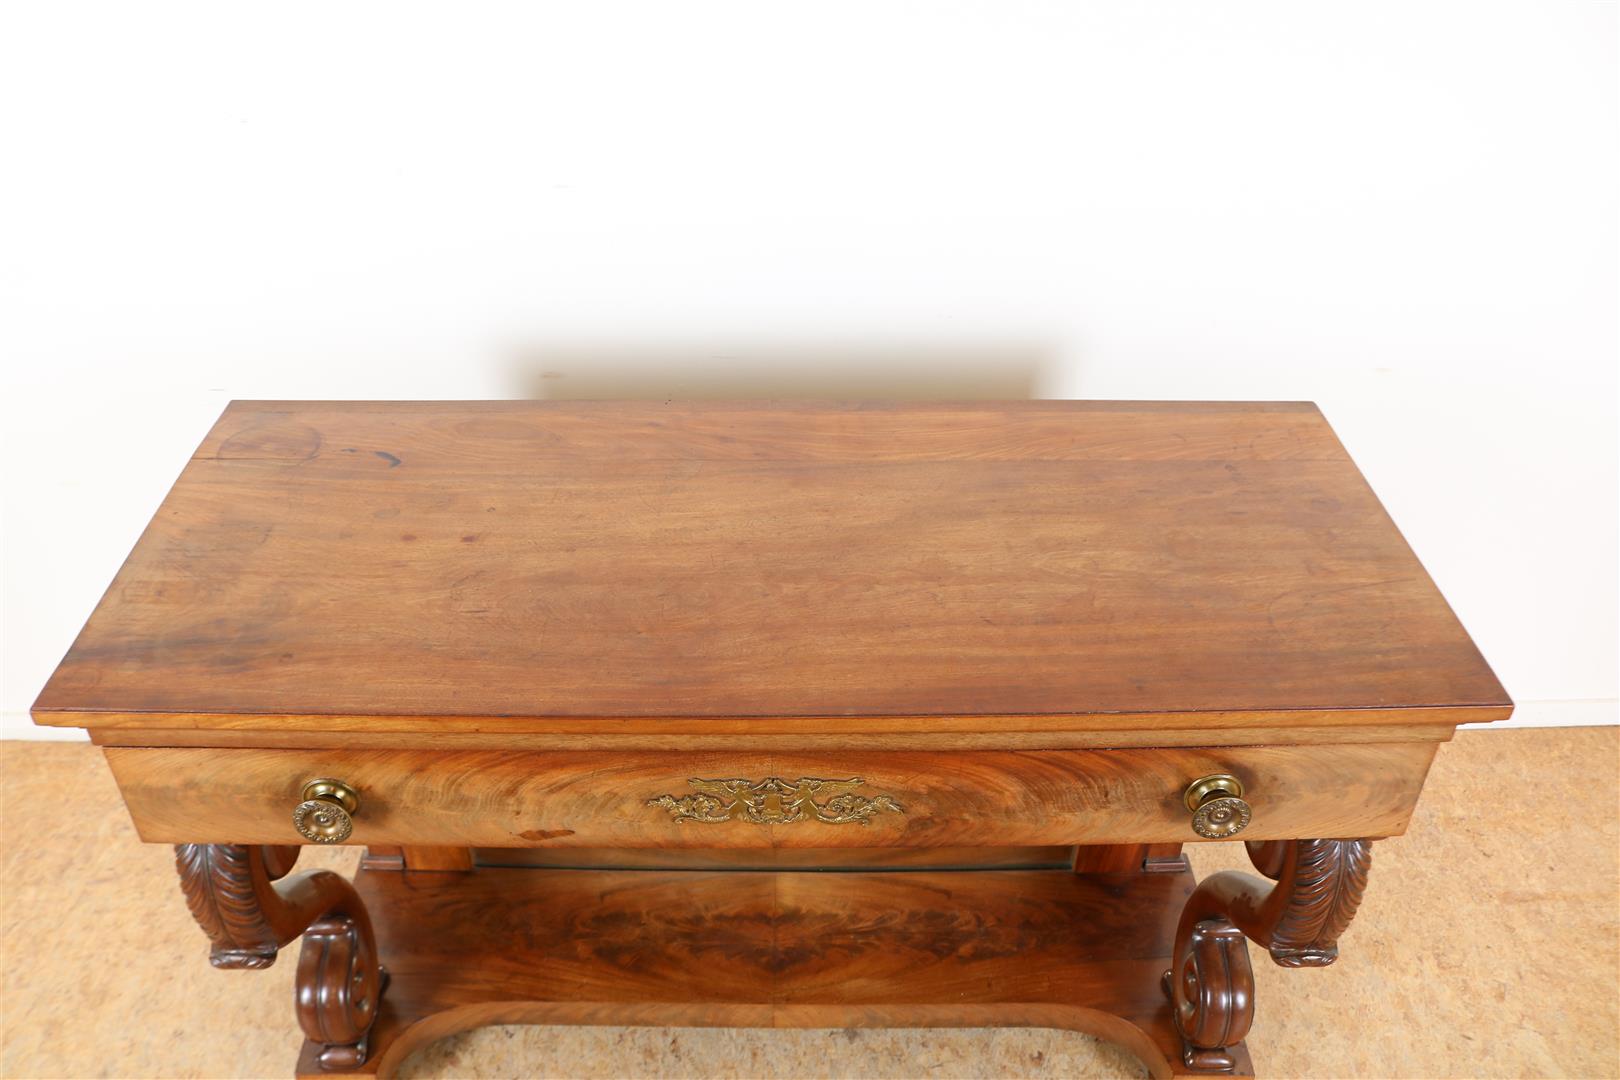 Mahogany Empire trumeau with plinth drawer on volutes with carved acanthus leaves, 2 side leaves and - Image 2 of 8